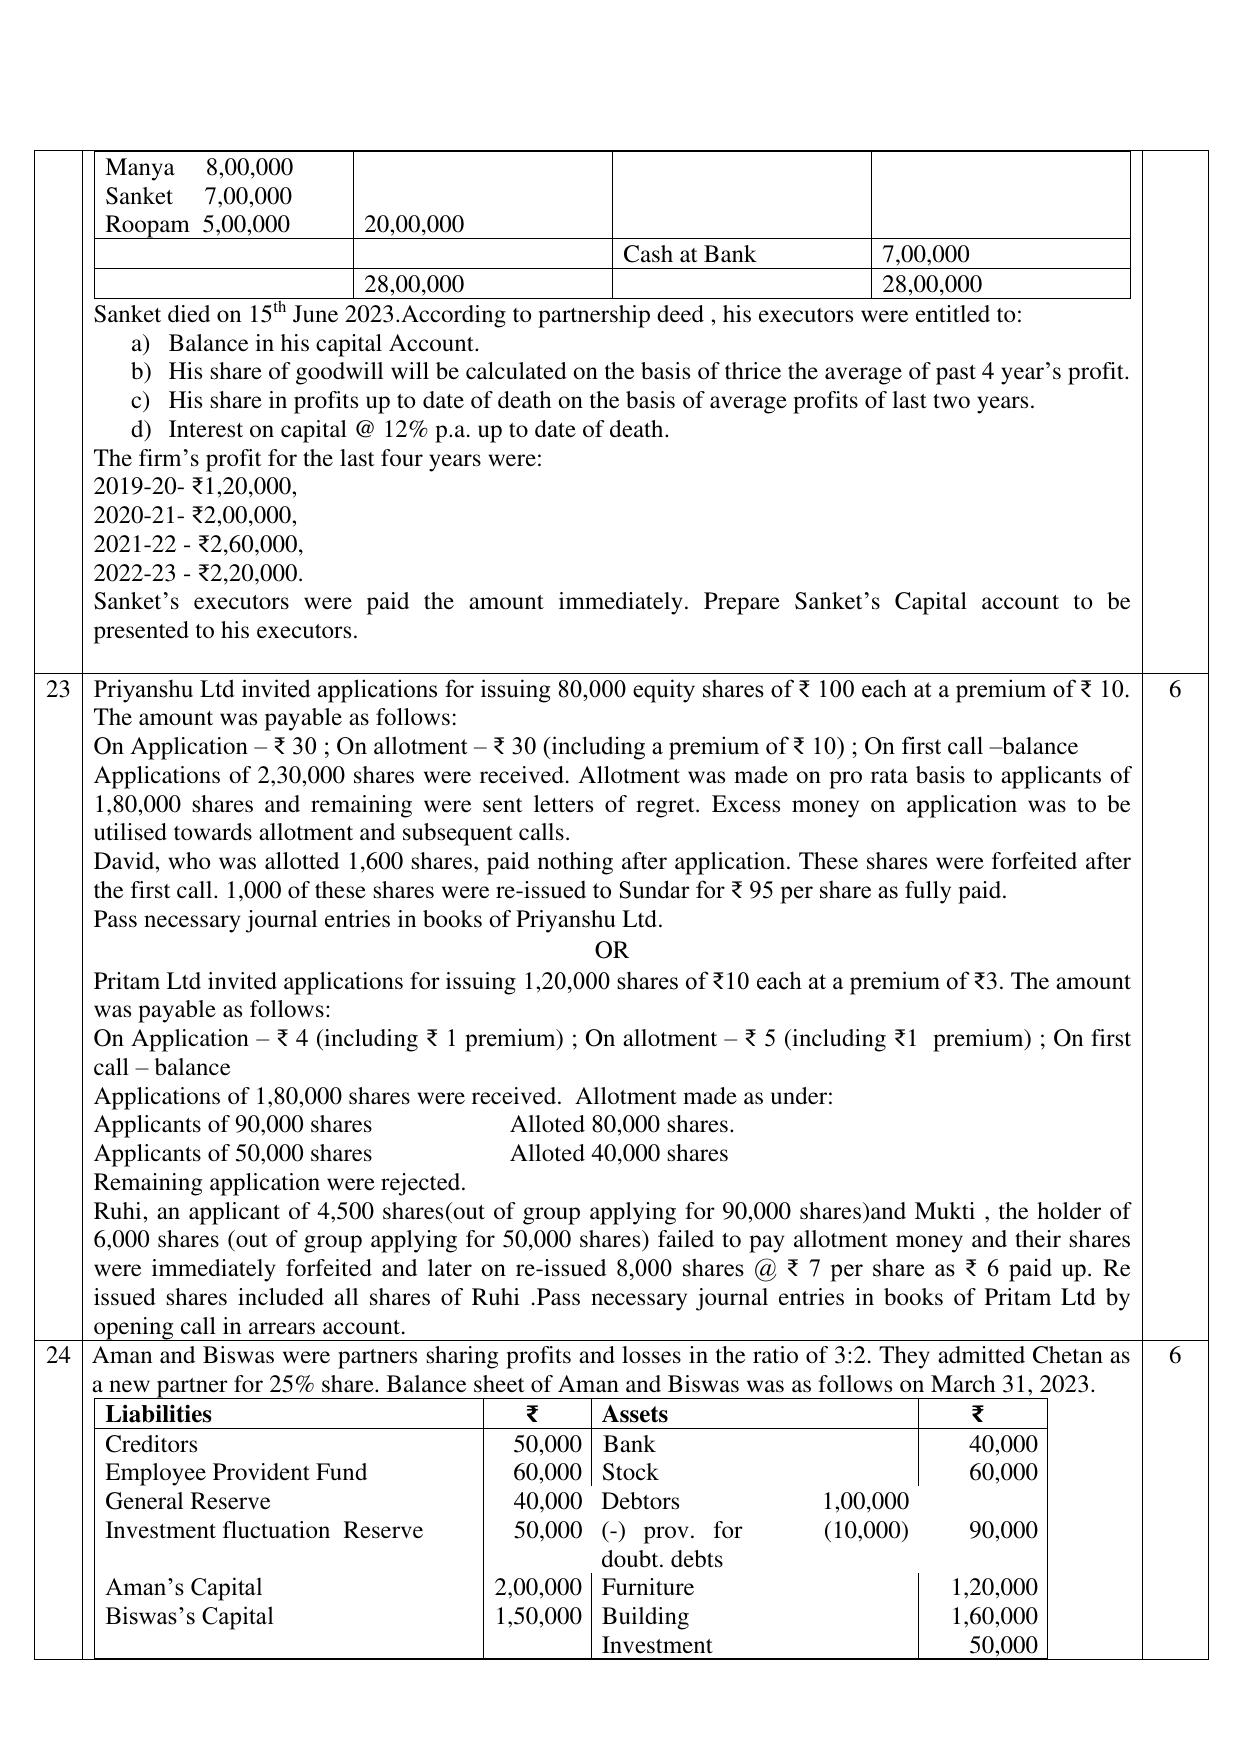 CBSE Class 12 Accountancy SET 2 Practice Questions 2023-24  - Page 5